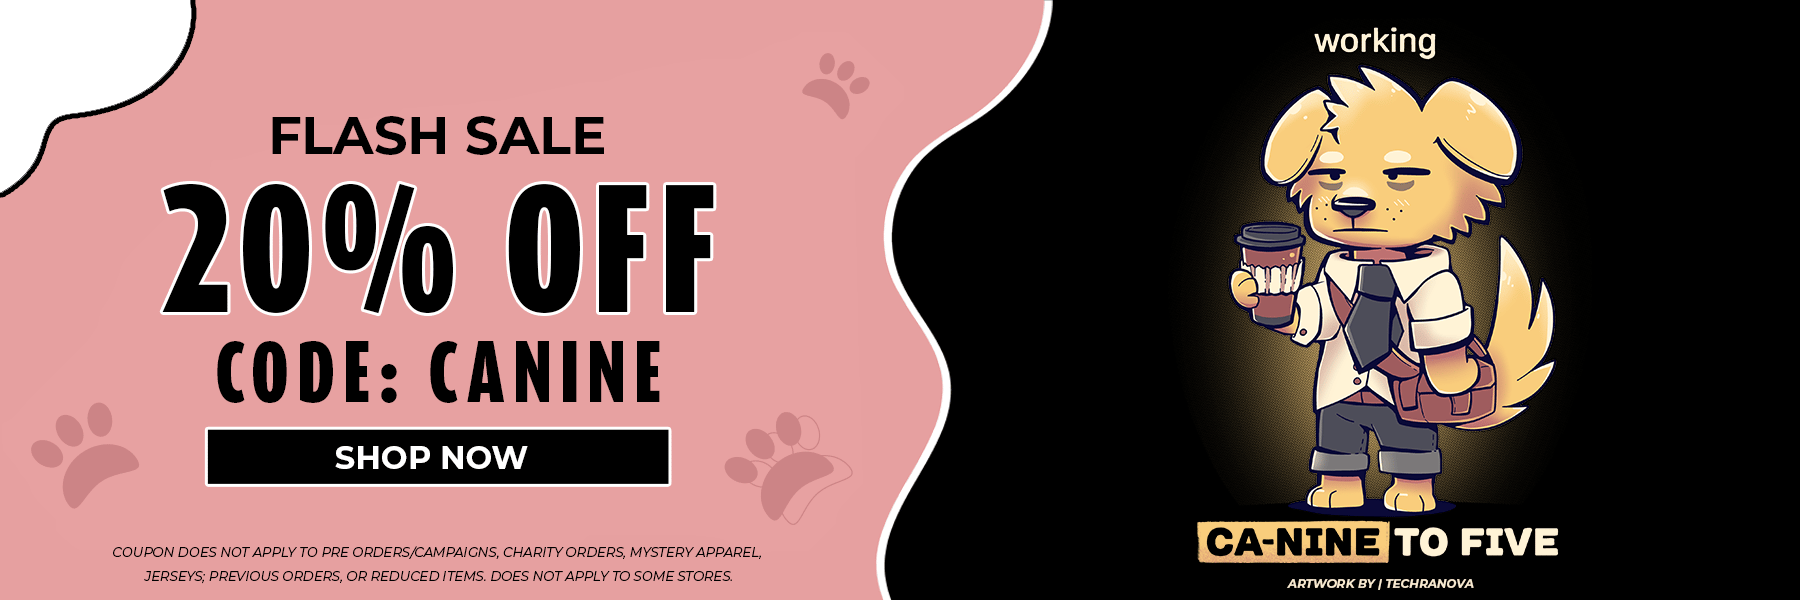 Flash Sale. 20% Off Code CANINE. Shop Now. Exclusions Apply. . Working Canine to Five. Dog with coff